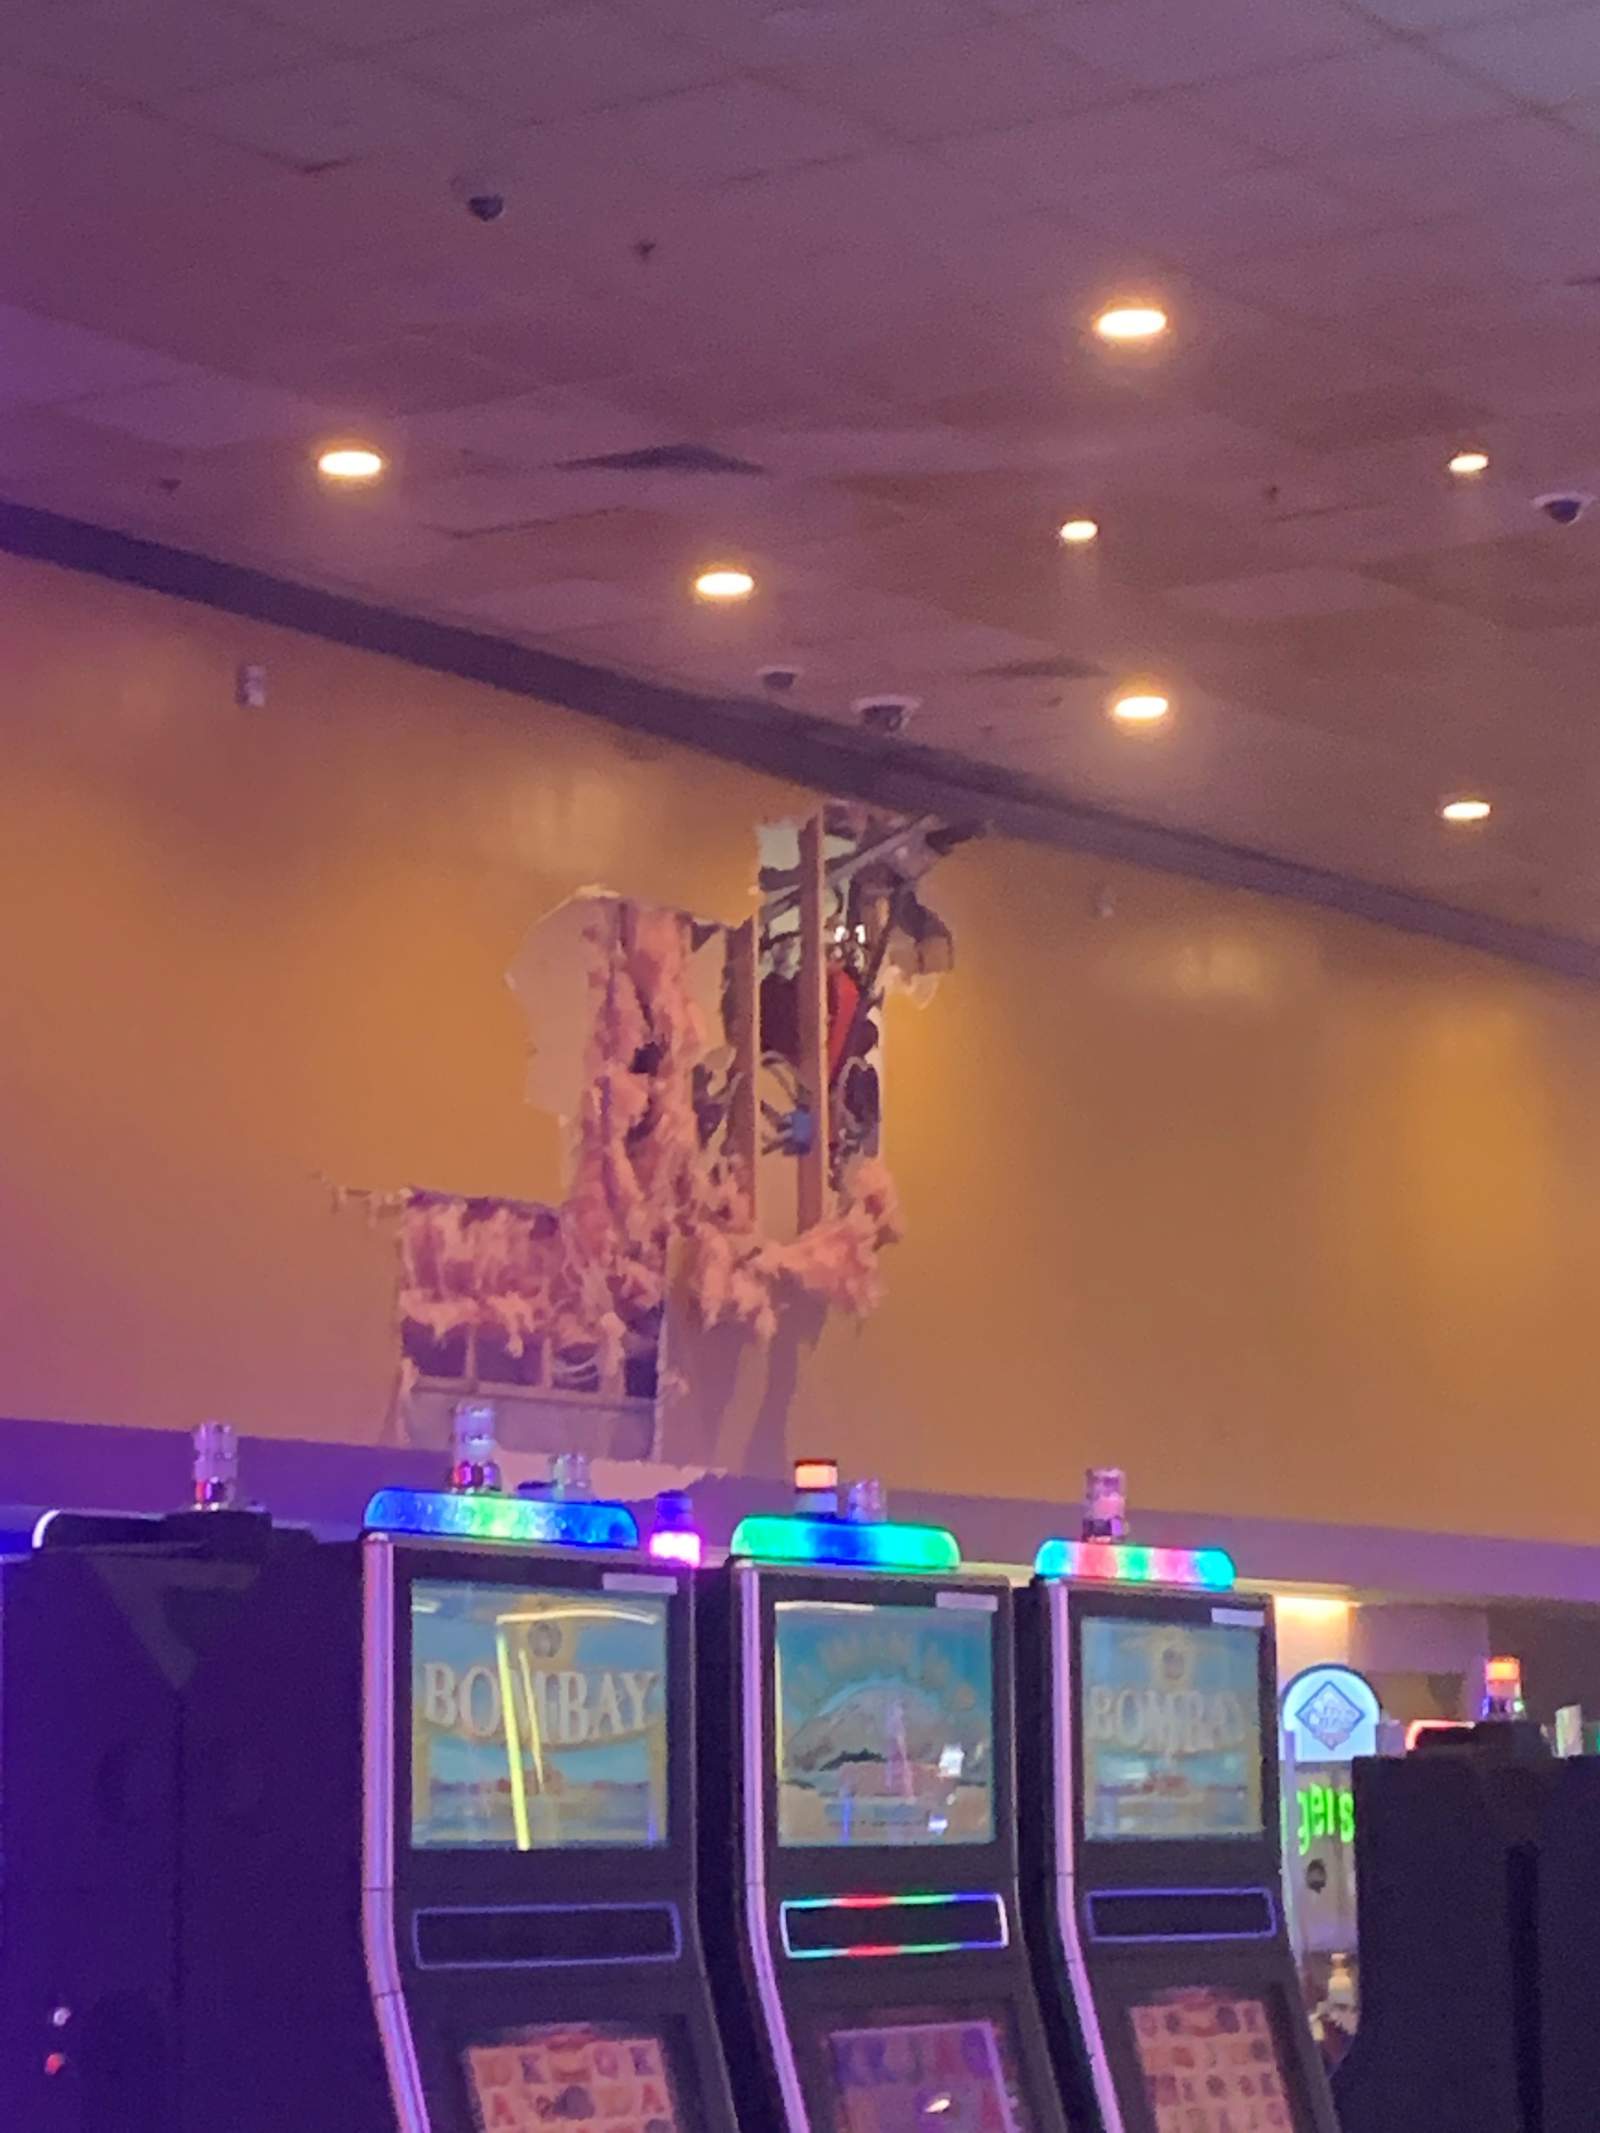 Damage seen at the Seminole Classic Casino Hollywood, sent by a witness.